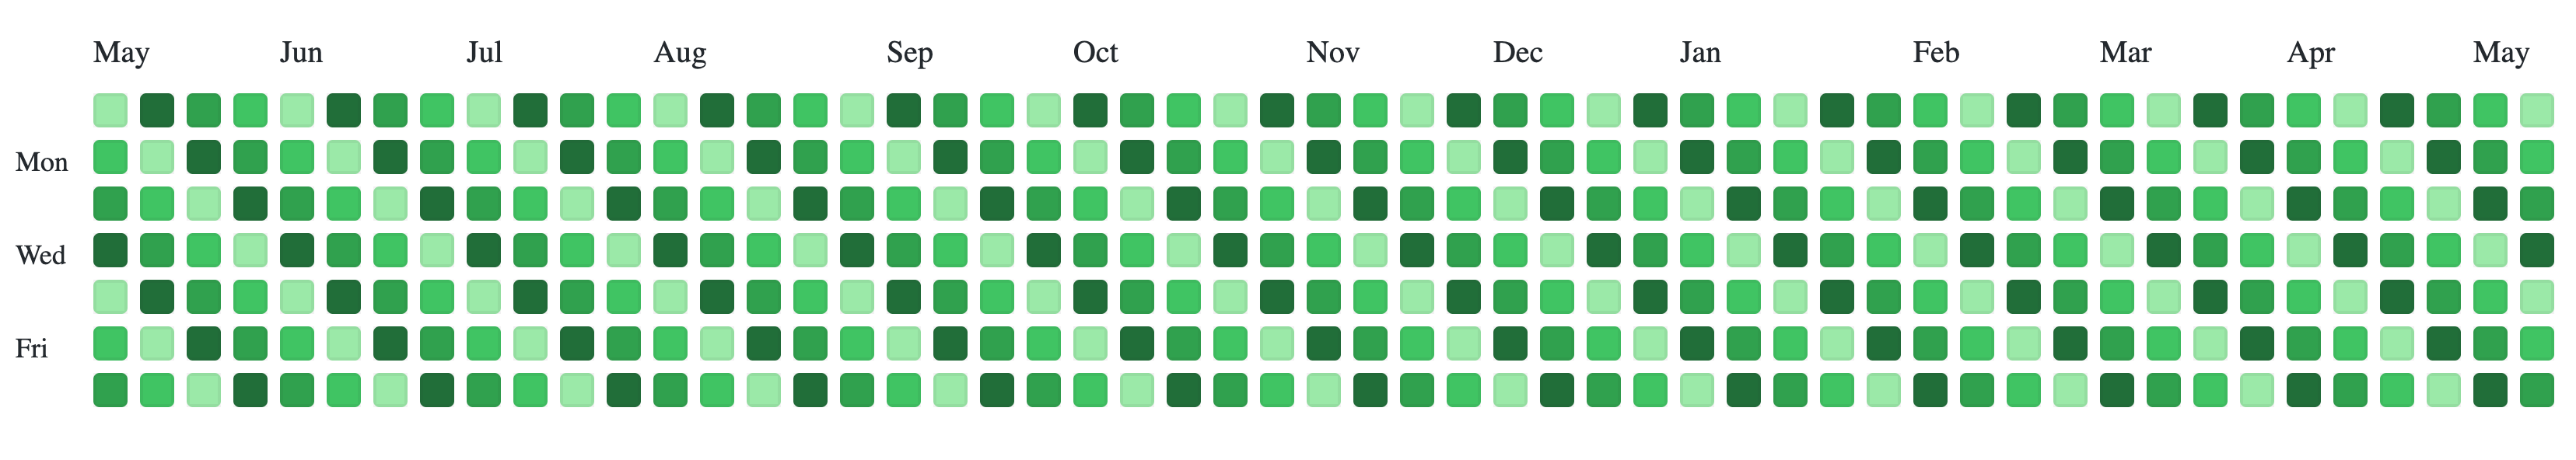 GitHub contribution graph entirely filled in with a regular pattern as a tile